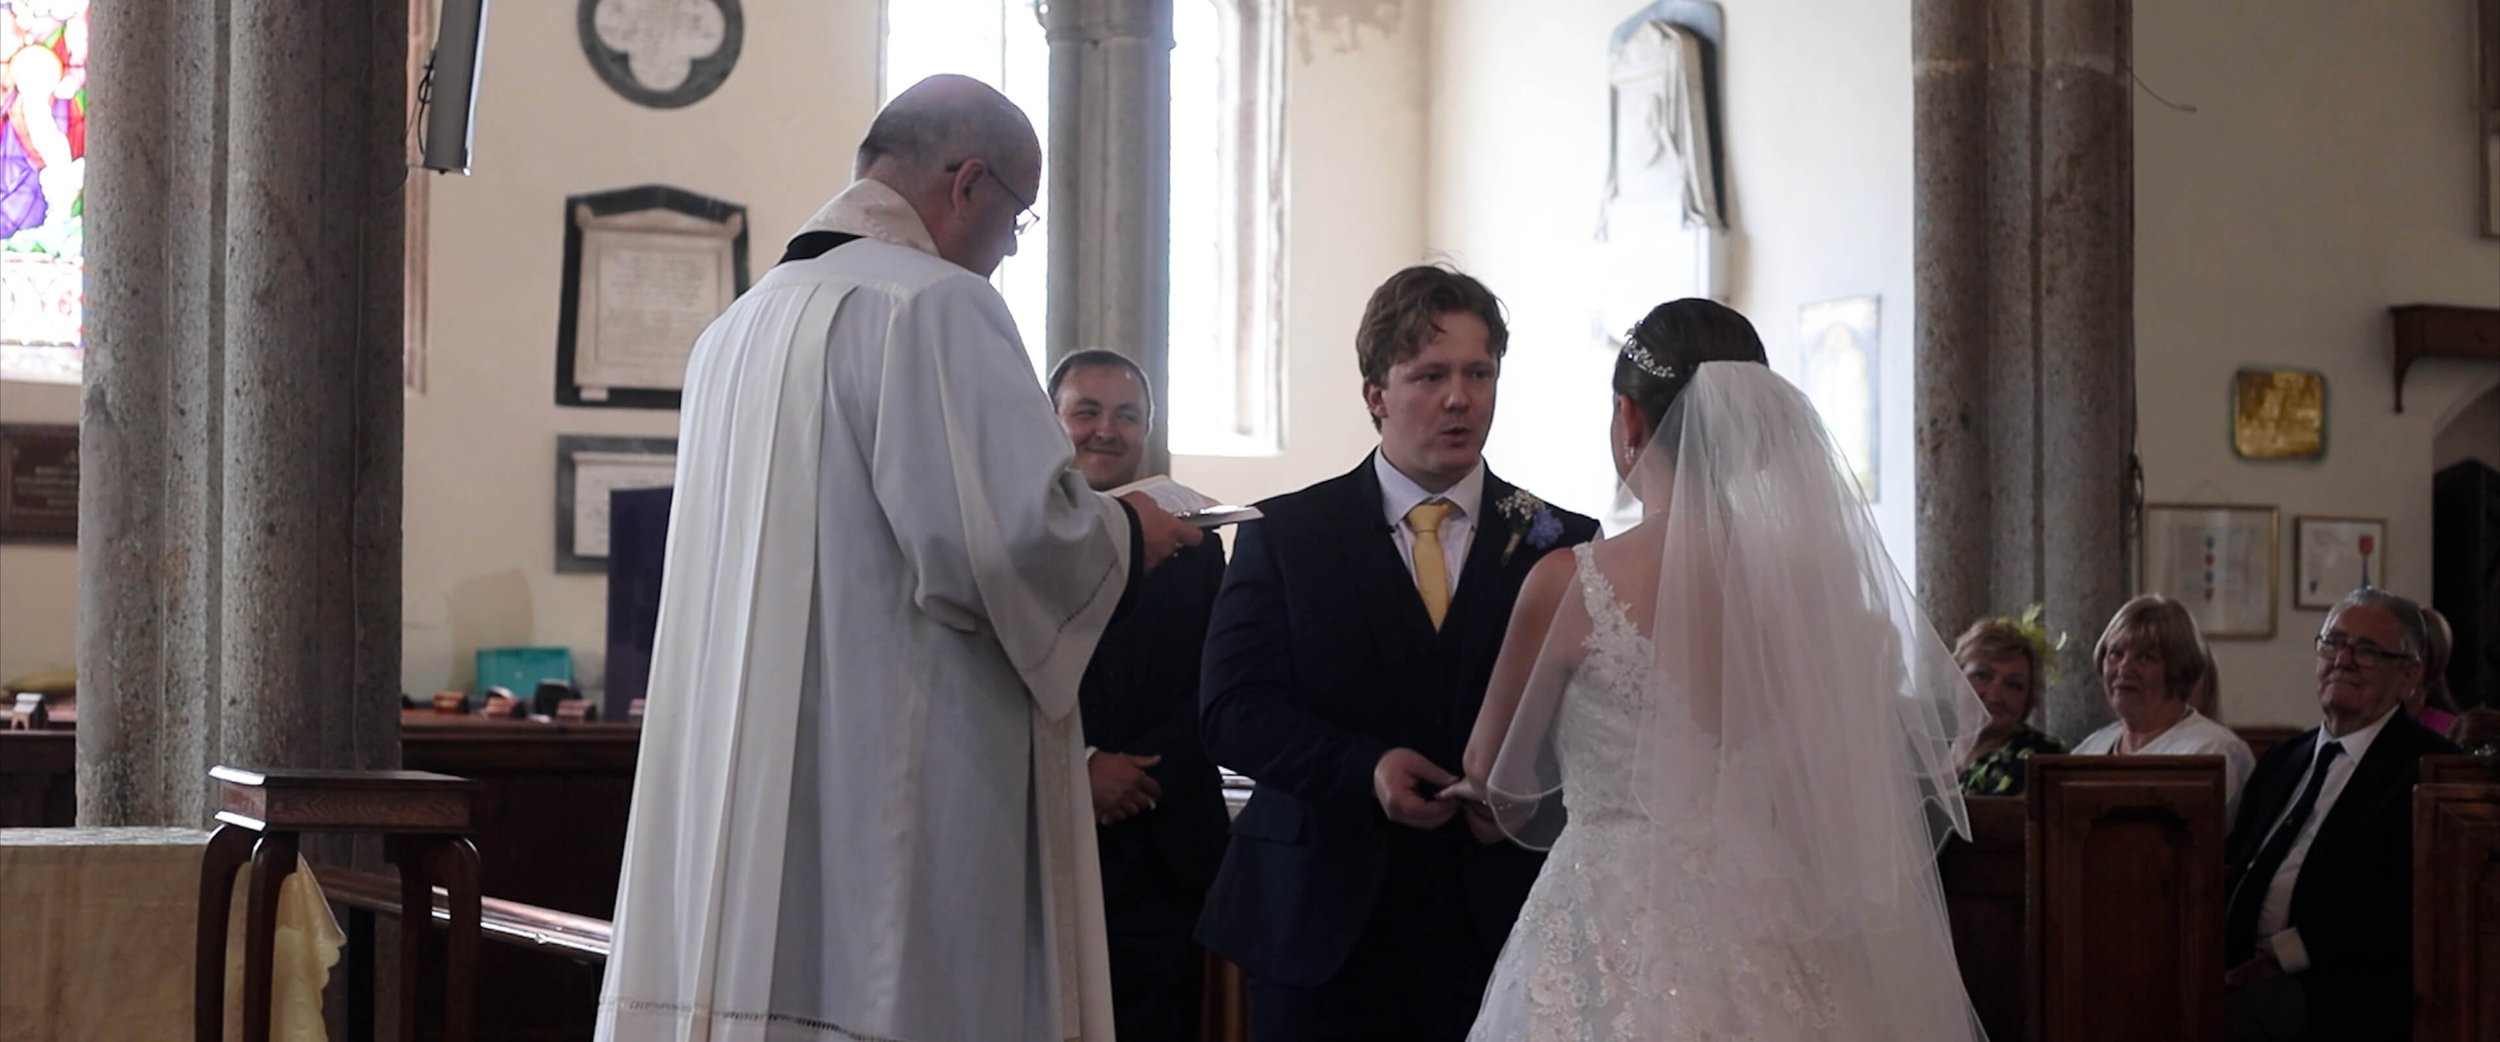 Vicar performs 16th Century vows to Dael &amp; Emma during the church wedding ceremony